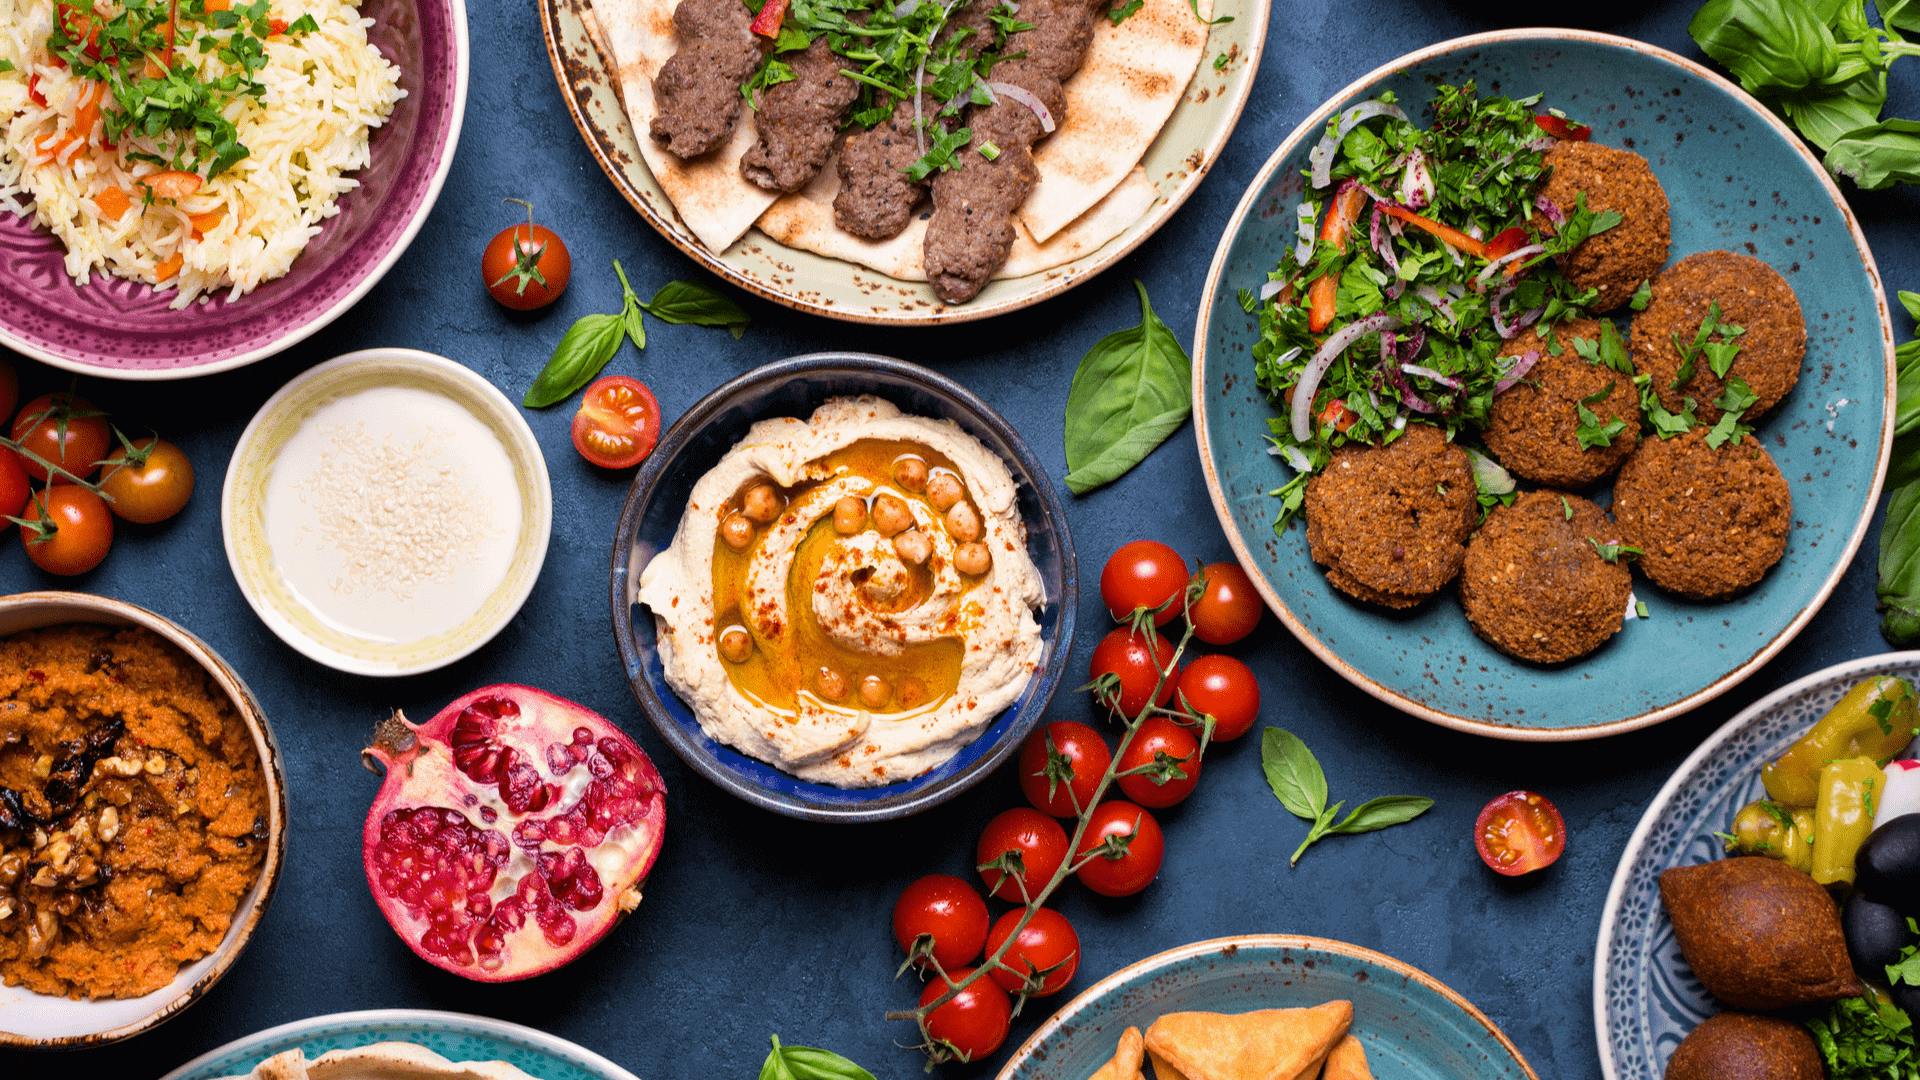 Halal Meal Prep: How We Cater to Everyone at Diets2Go